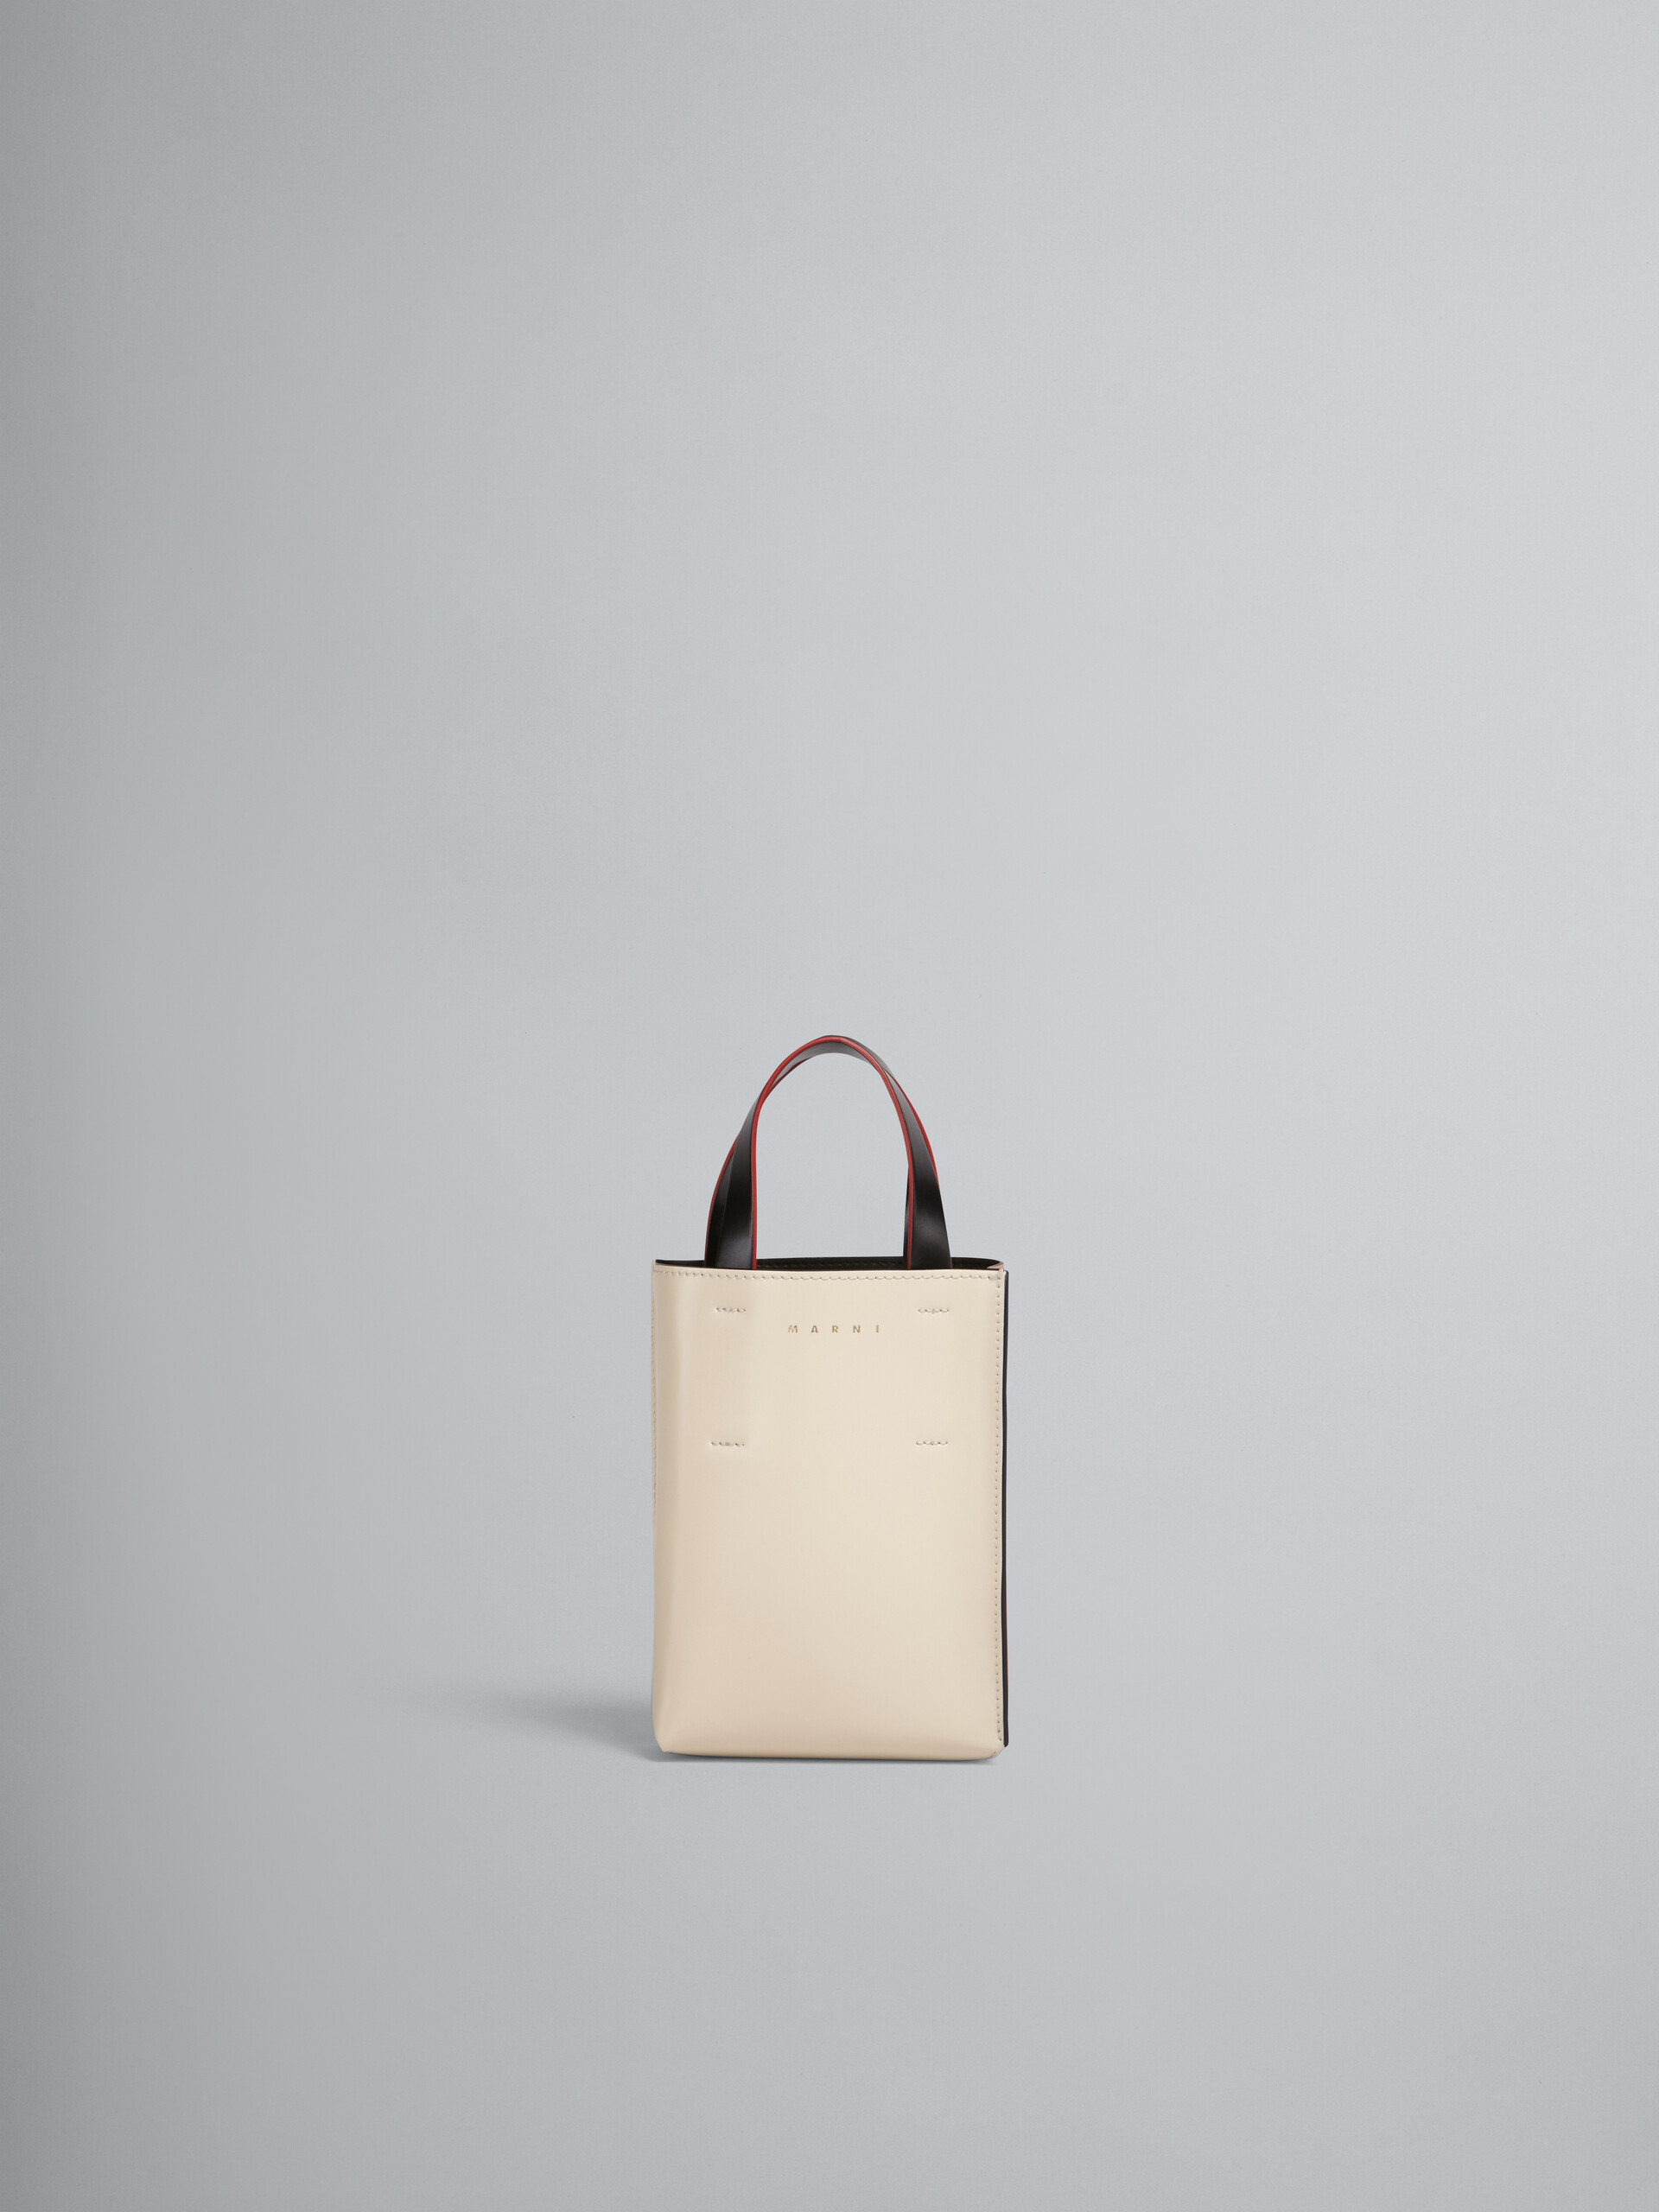 Nano MUSEO shopping bag in beige and pink smooth calfskin with shoulder strap - Shopping Bags - Image 1